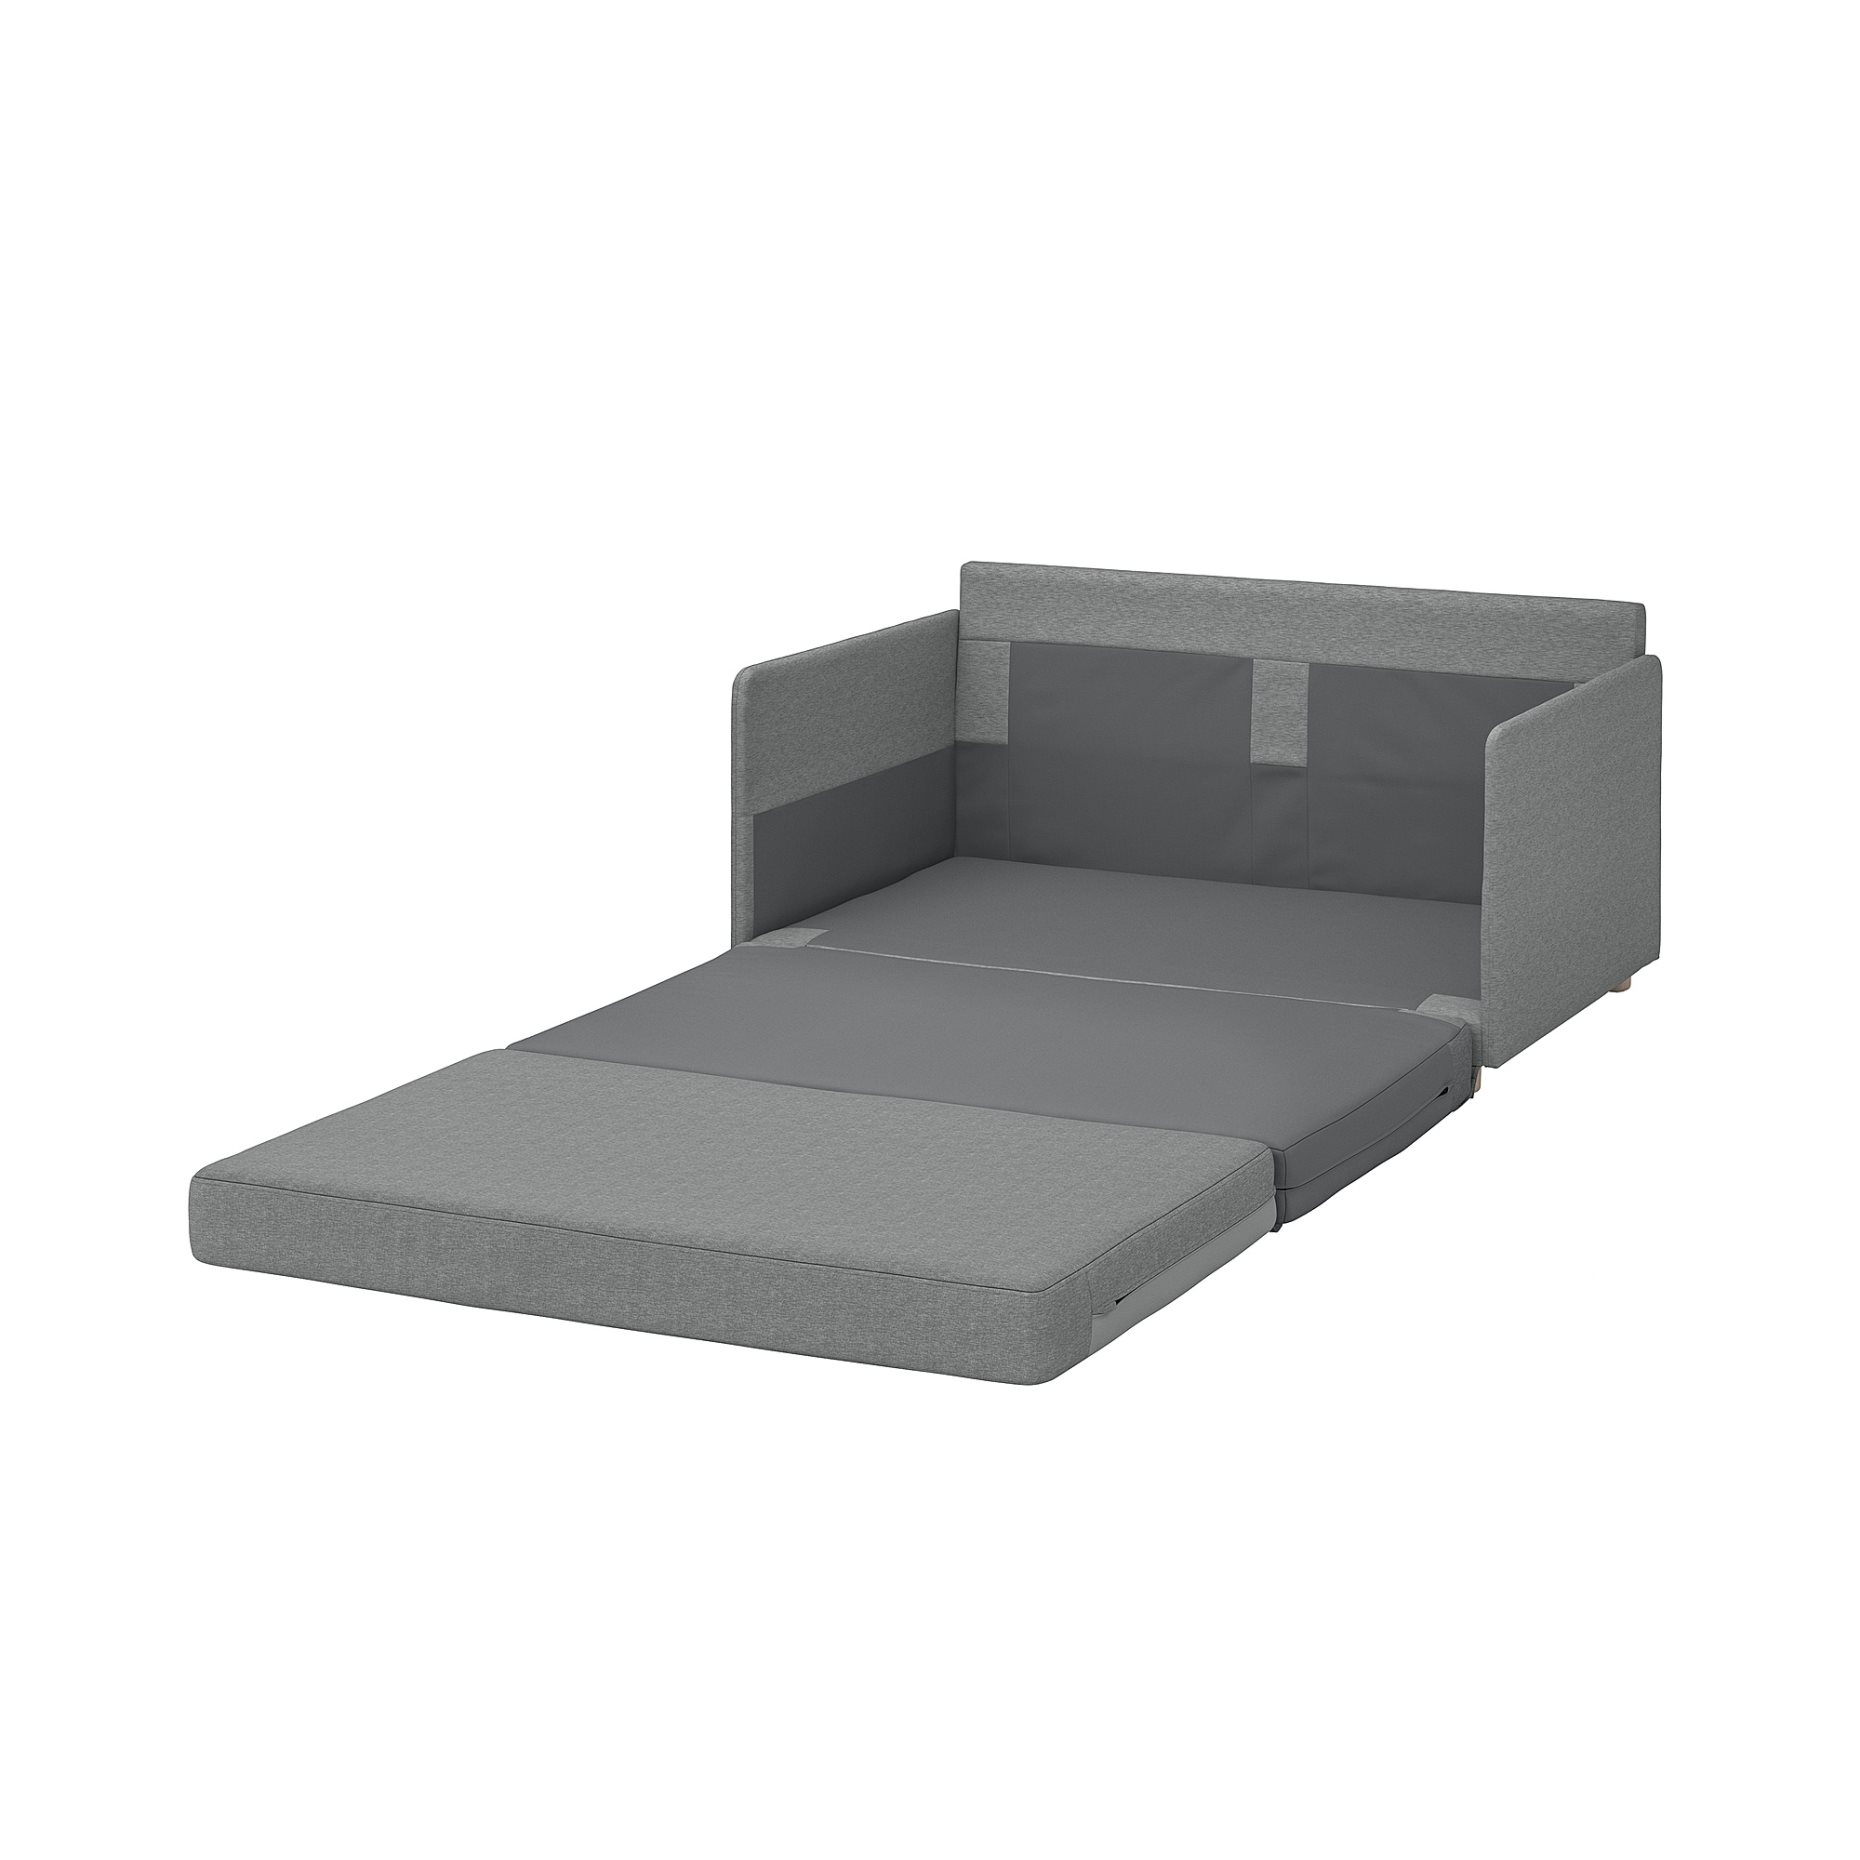 FRIDHULT, sofa-bed, 703.517.25